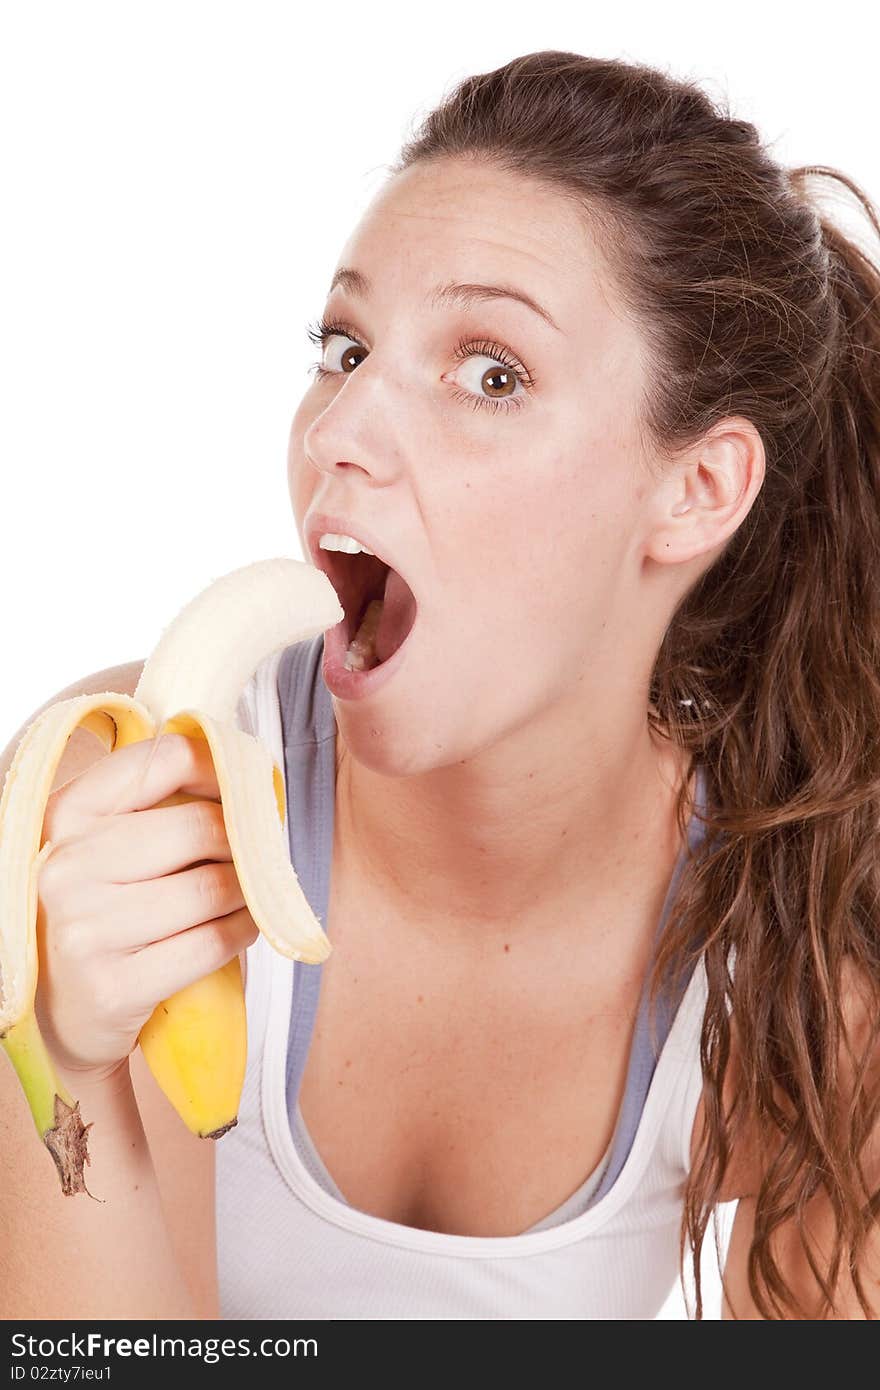 A woman is eating a banana and happy about it. A woman is eating a banana and happy about it.